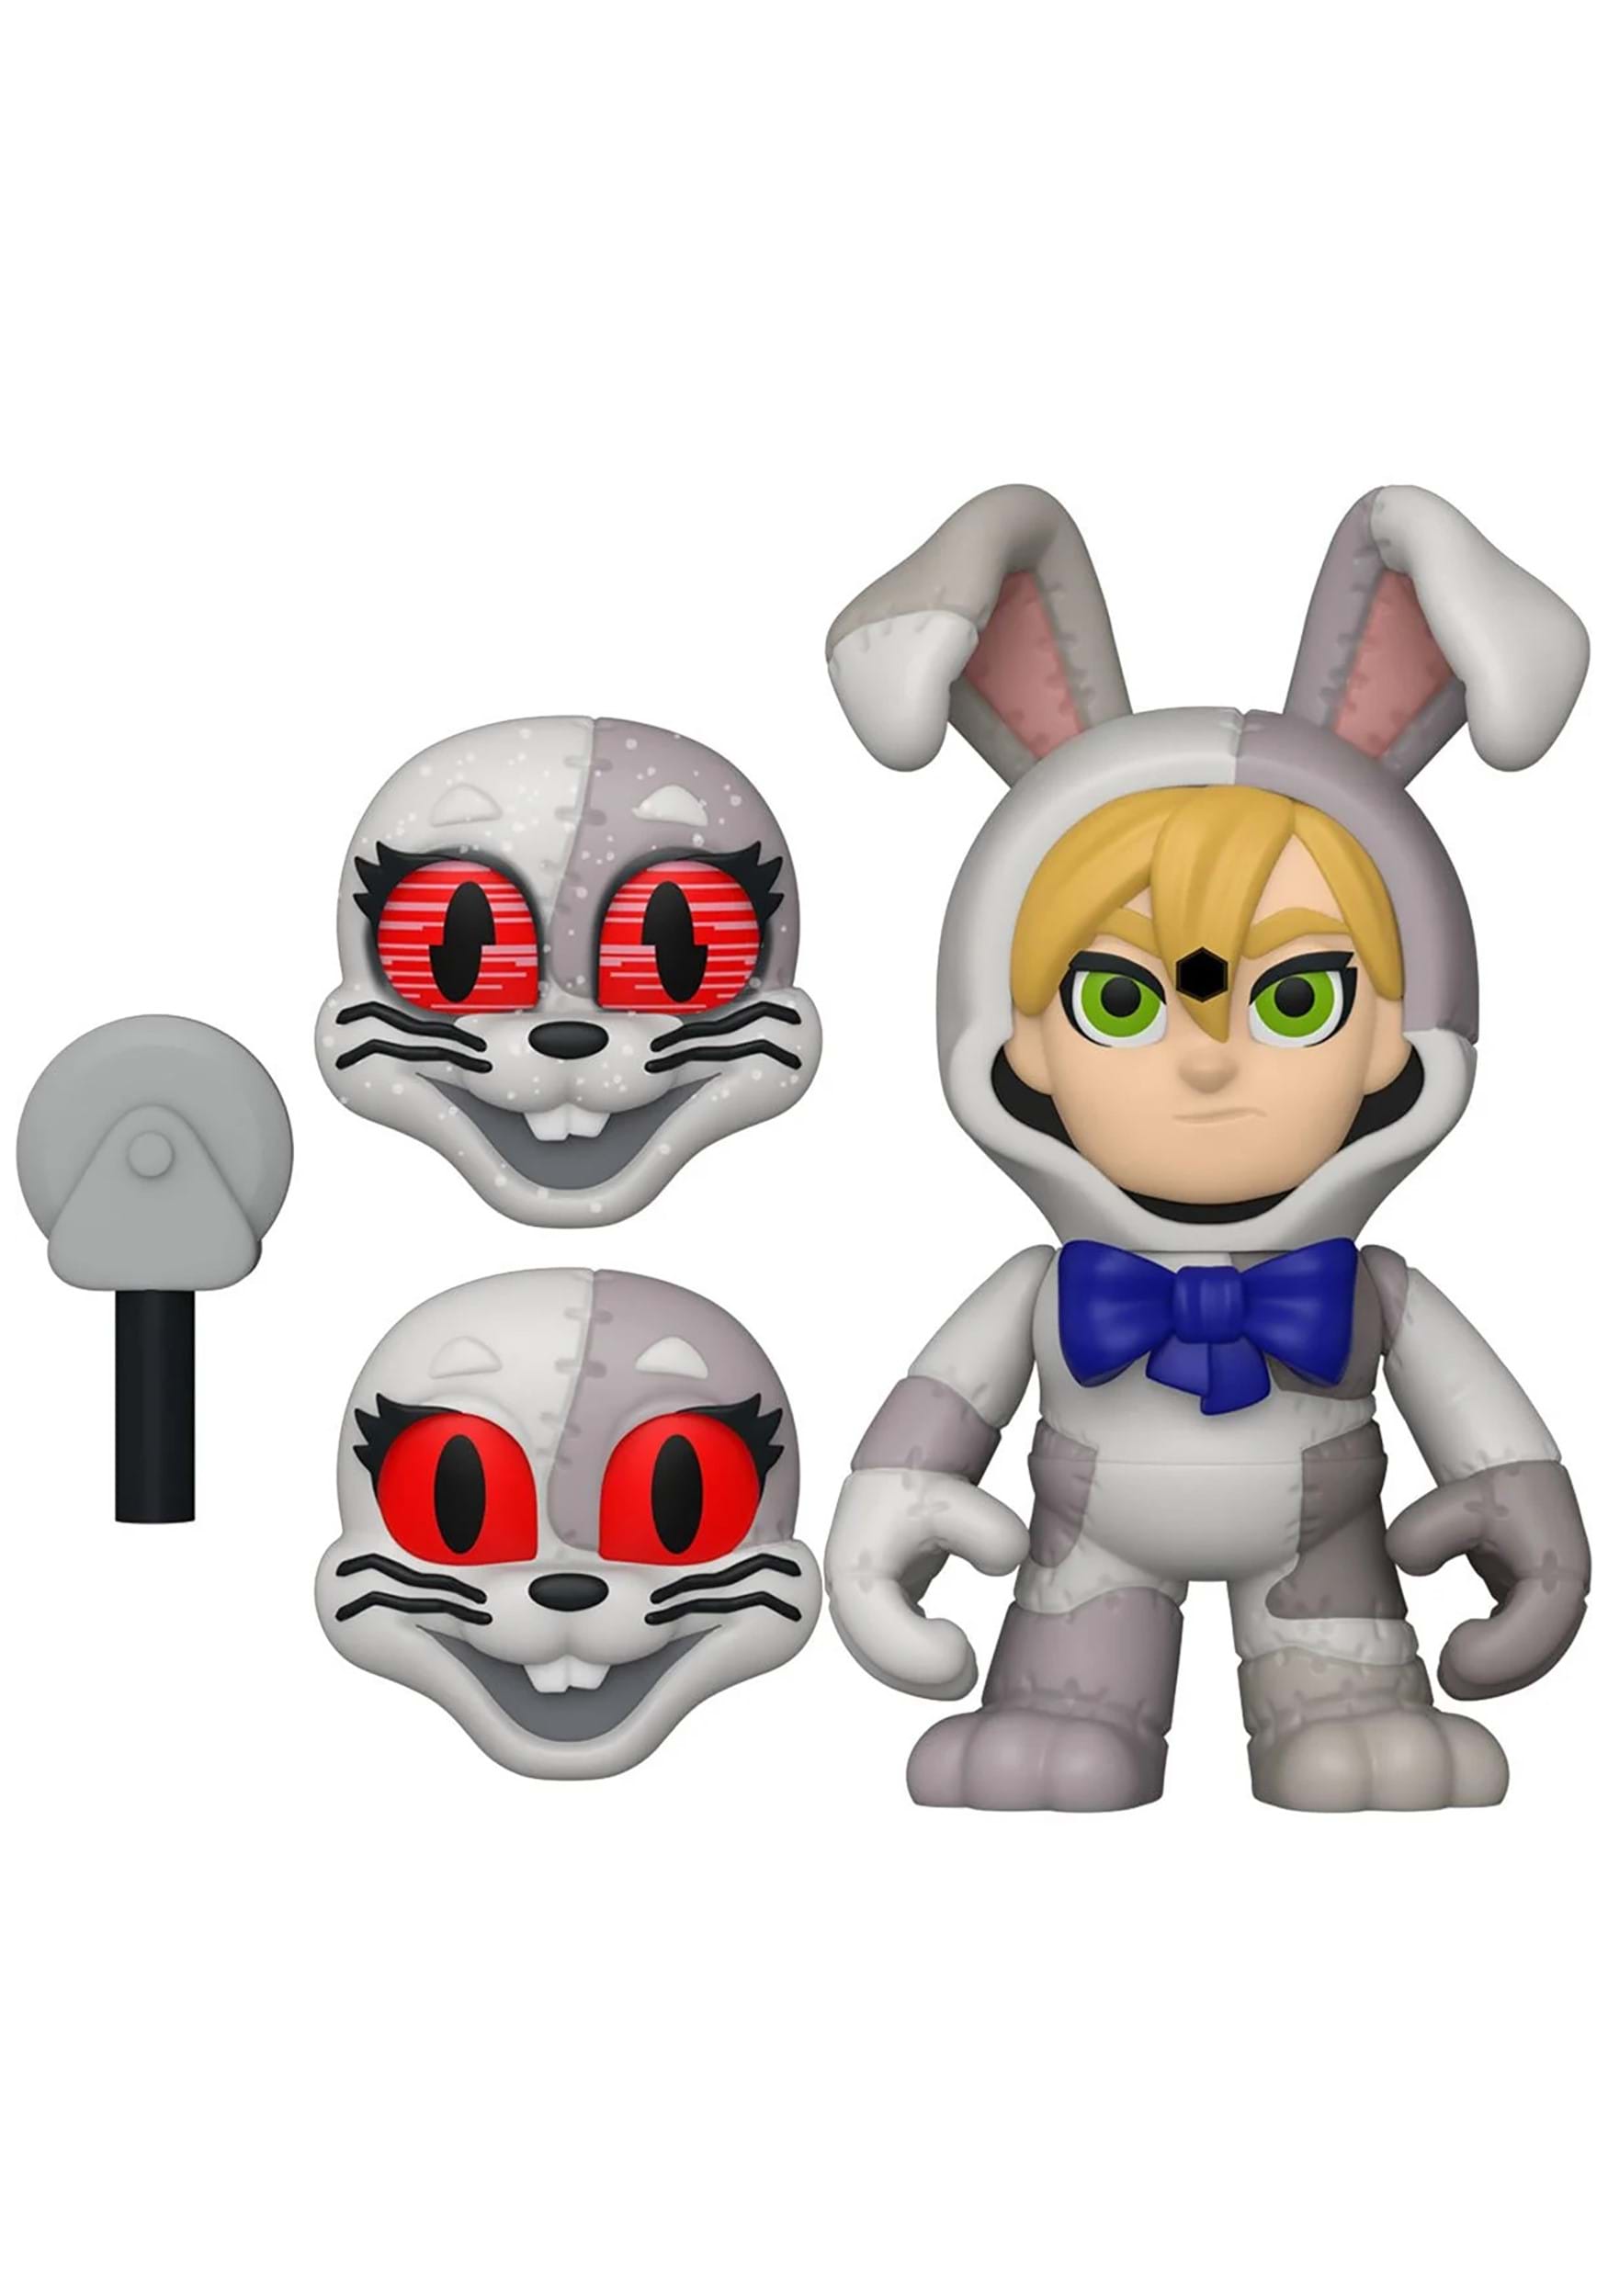 Funko Snaps Five Night's at Freddy's FNAF Toy Chica and Nightmare